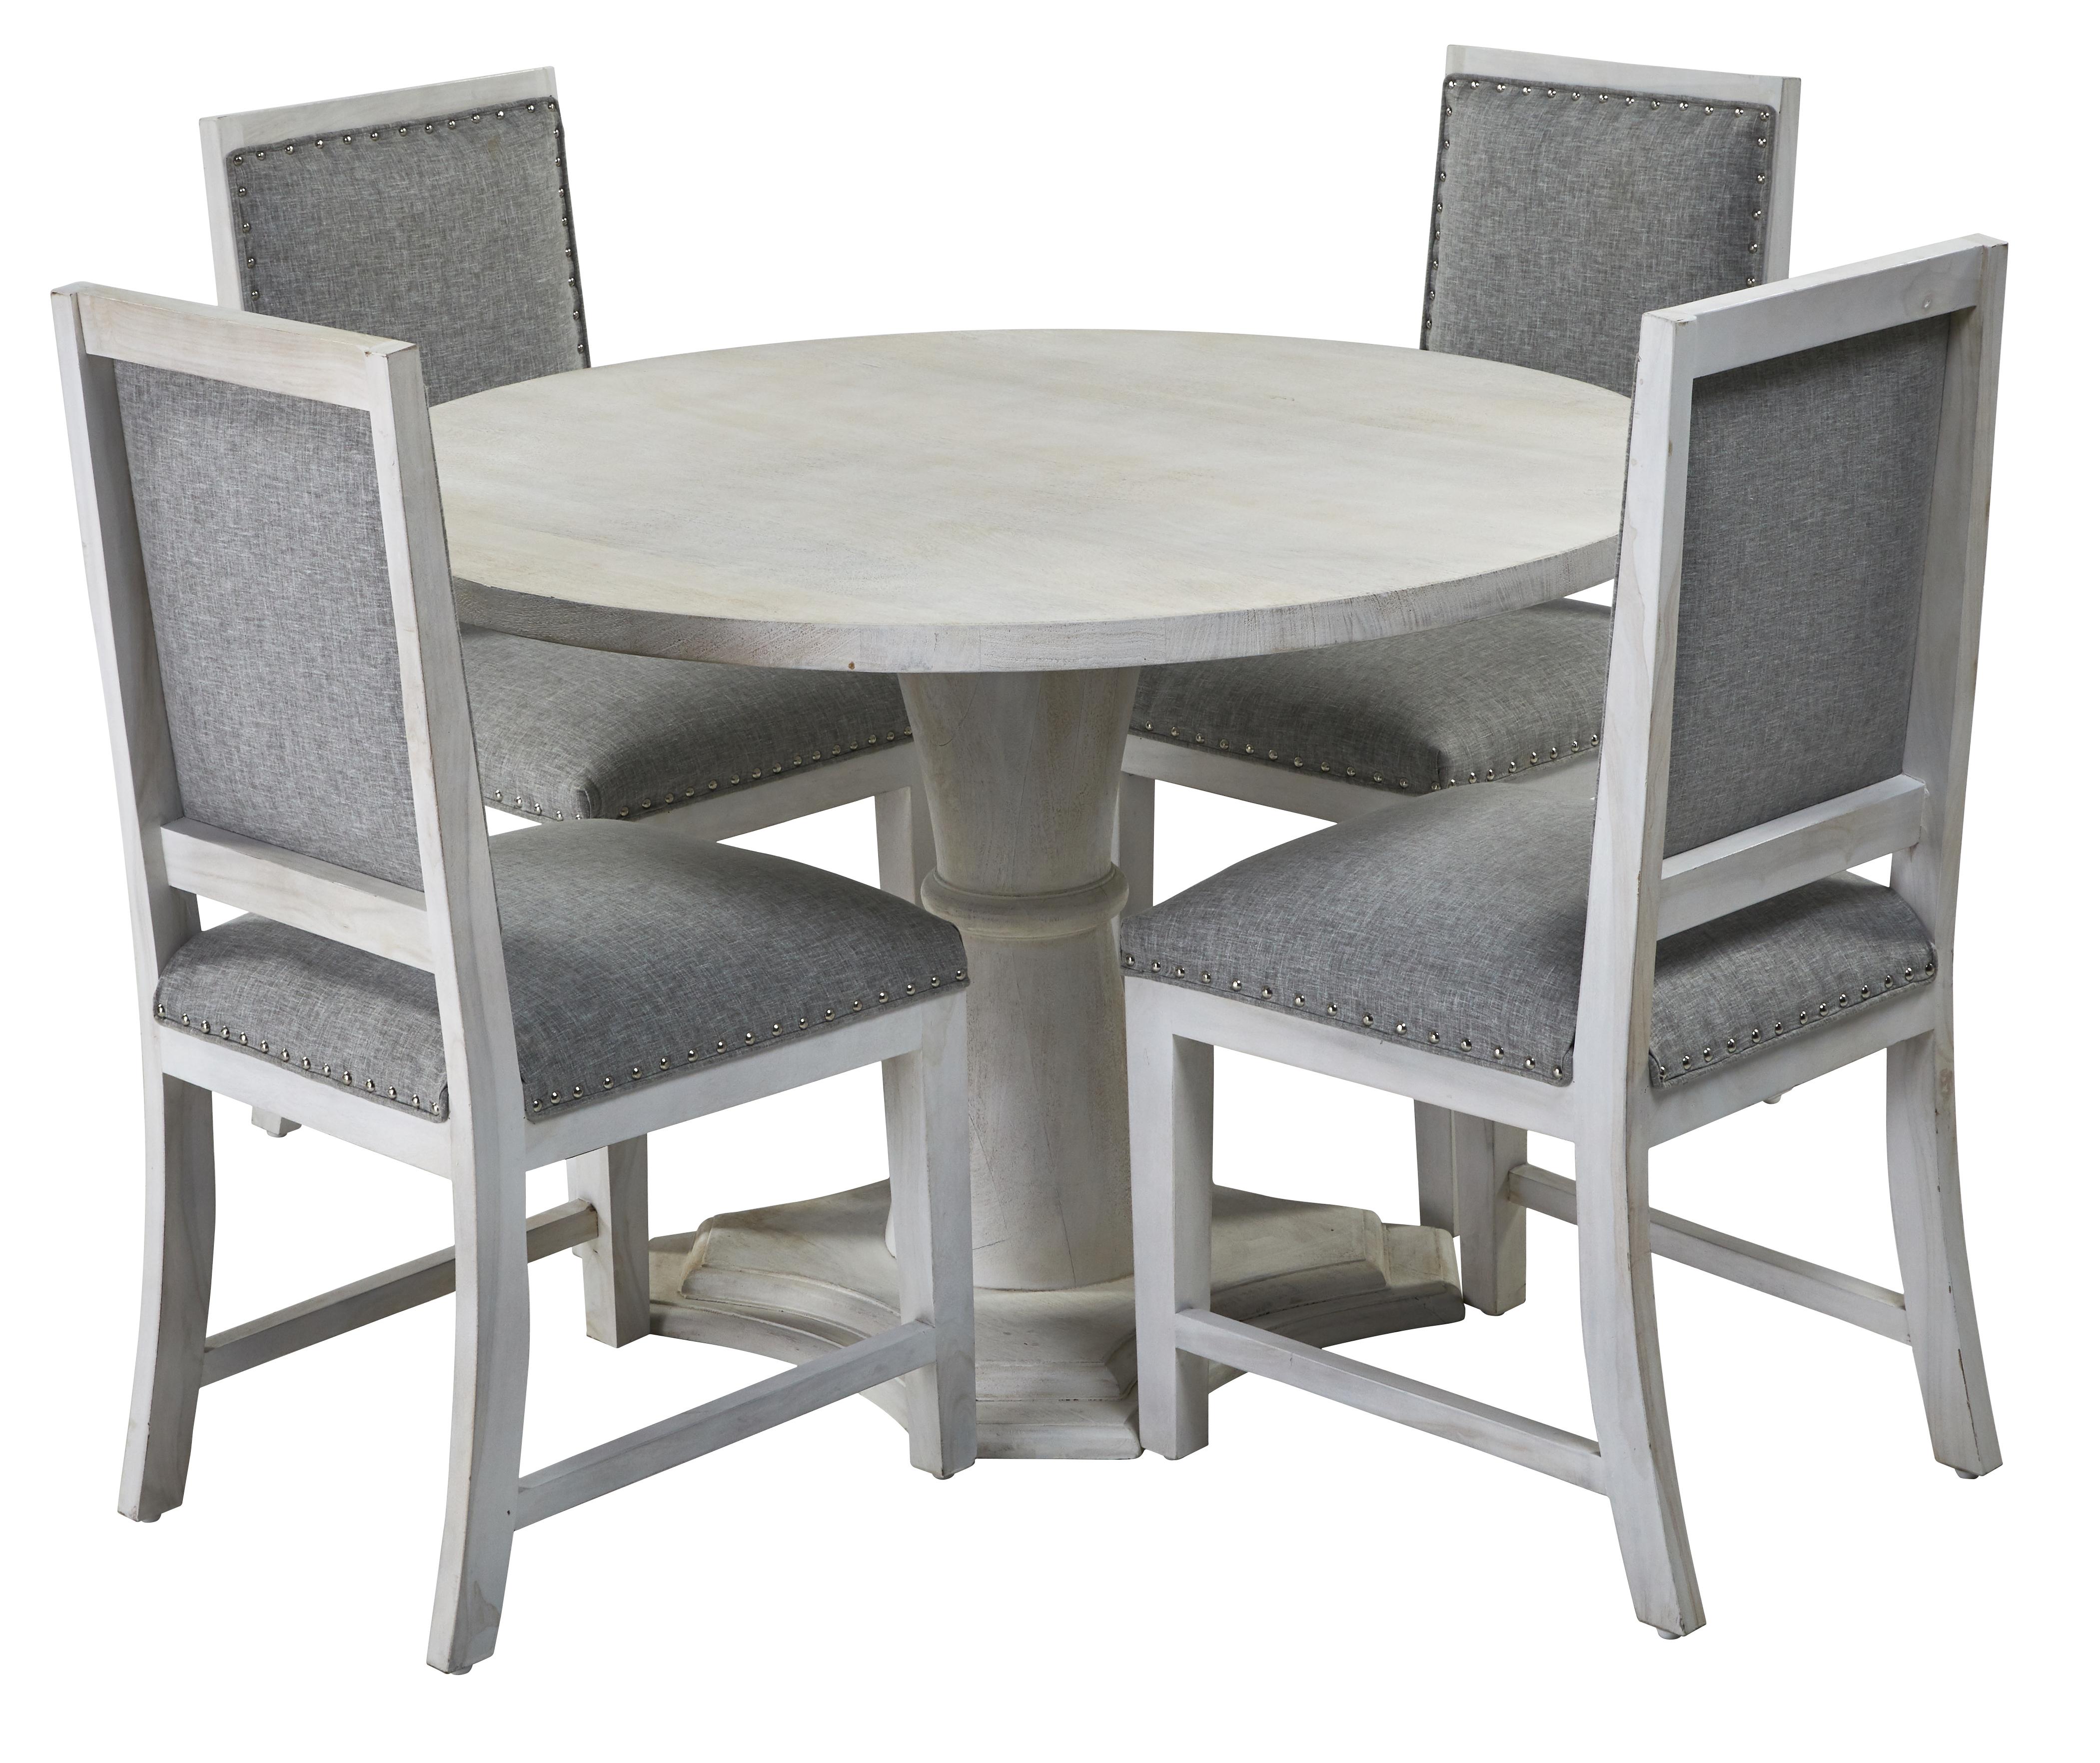 Transitional Dining Room Set SS-10177-5PC Mendon SS-10177-5PC in whitewash 